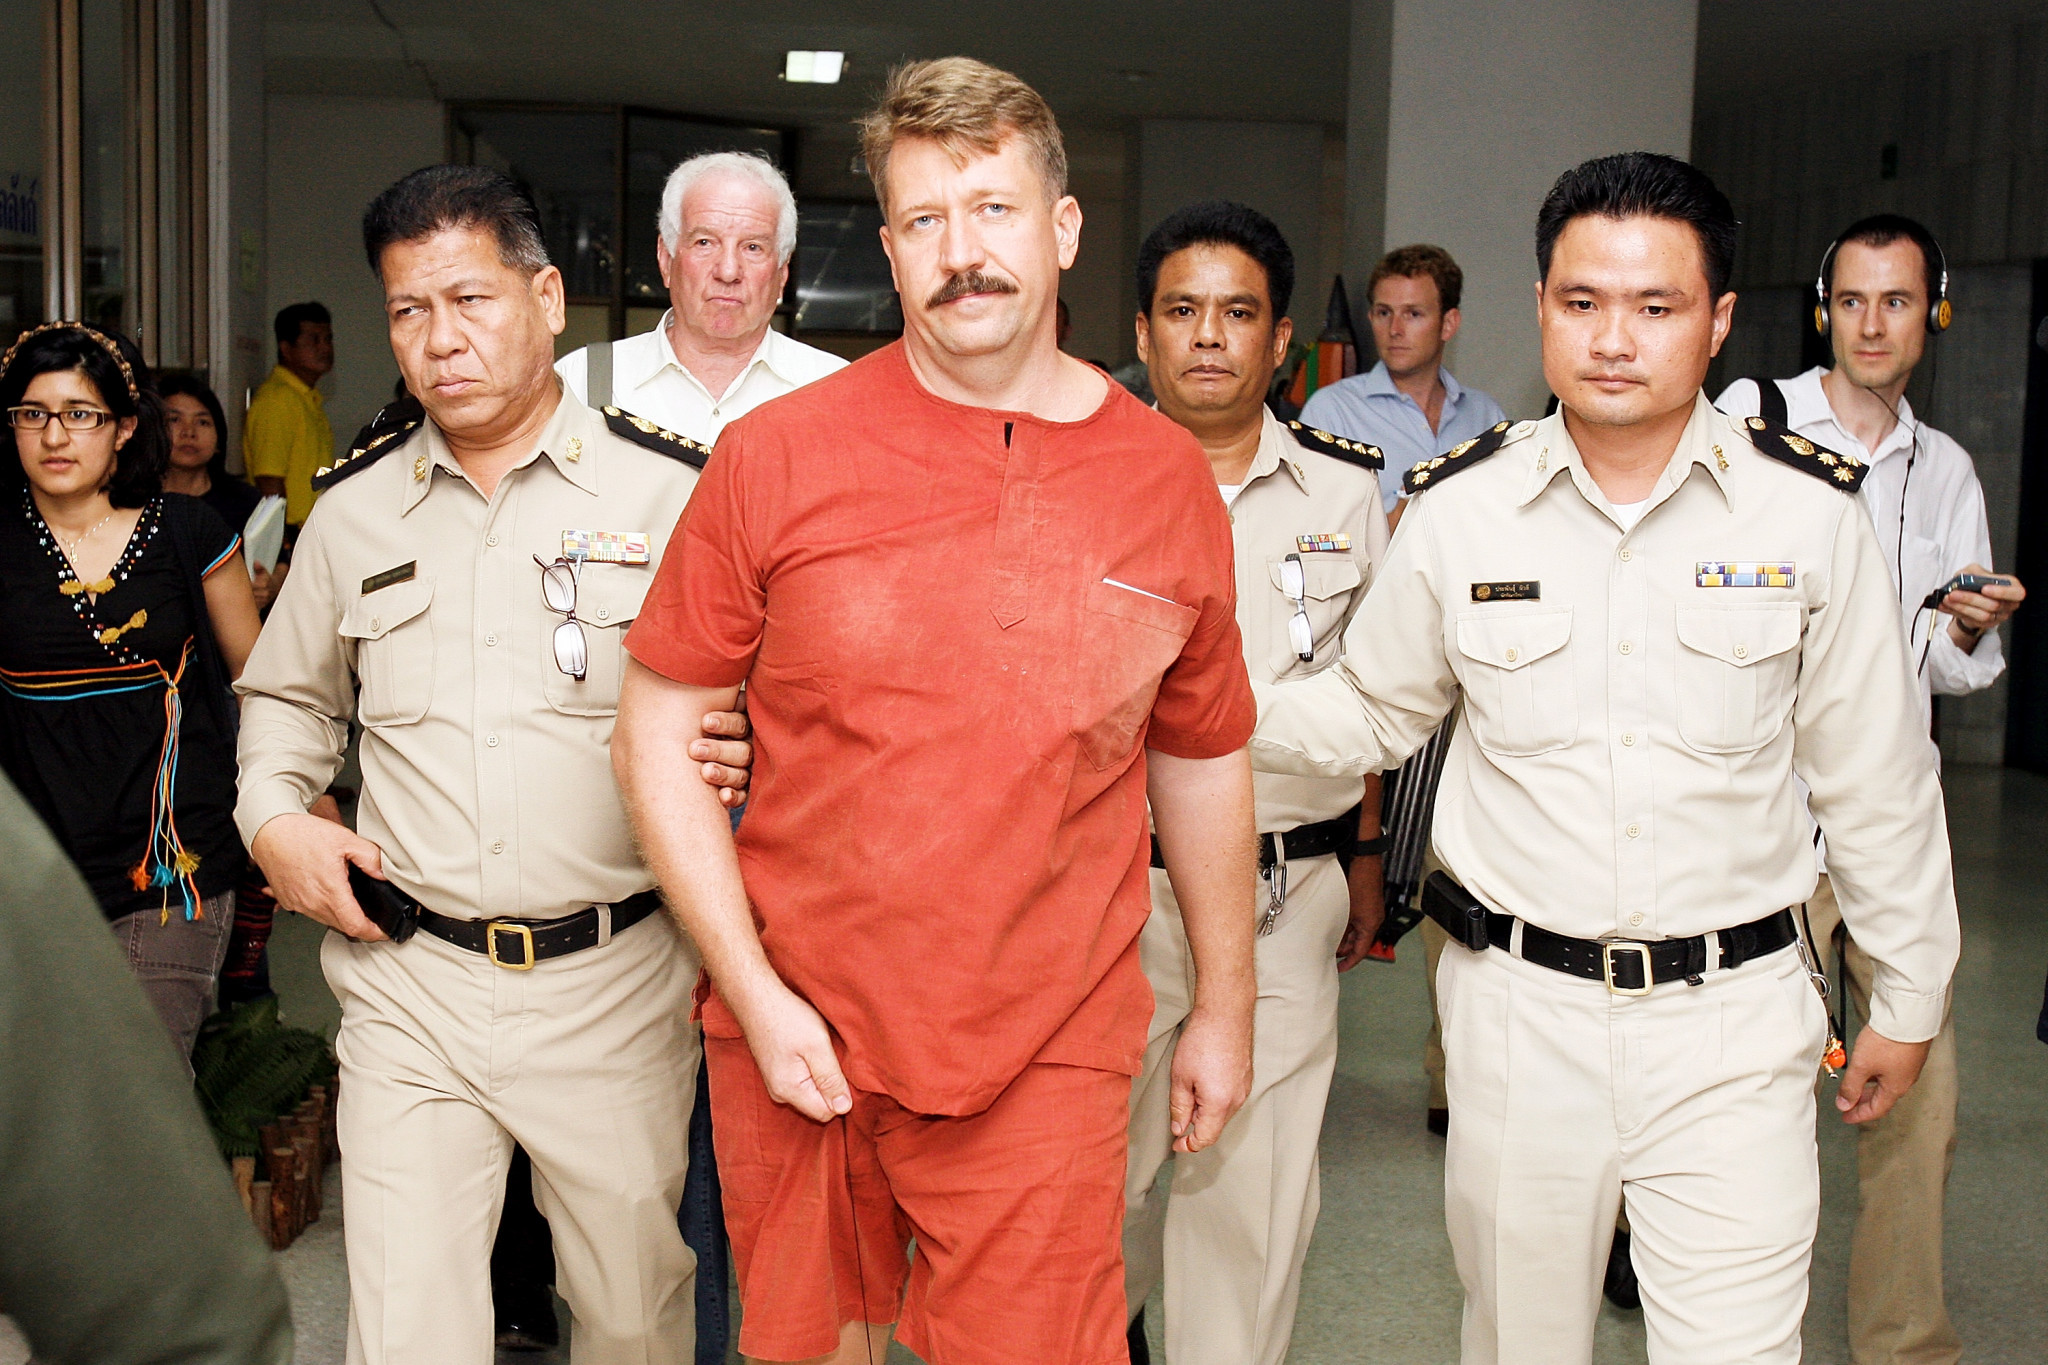 Viktor Bout was arrested in Bangkok in 2008 and was sentenced to 25 years in federal prison in 2012 ©Getty Images